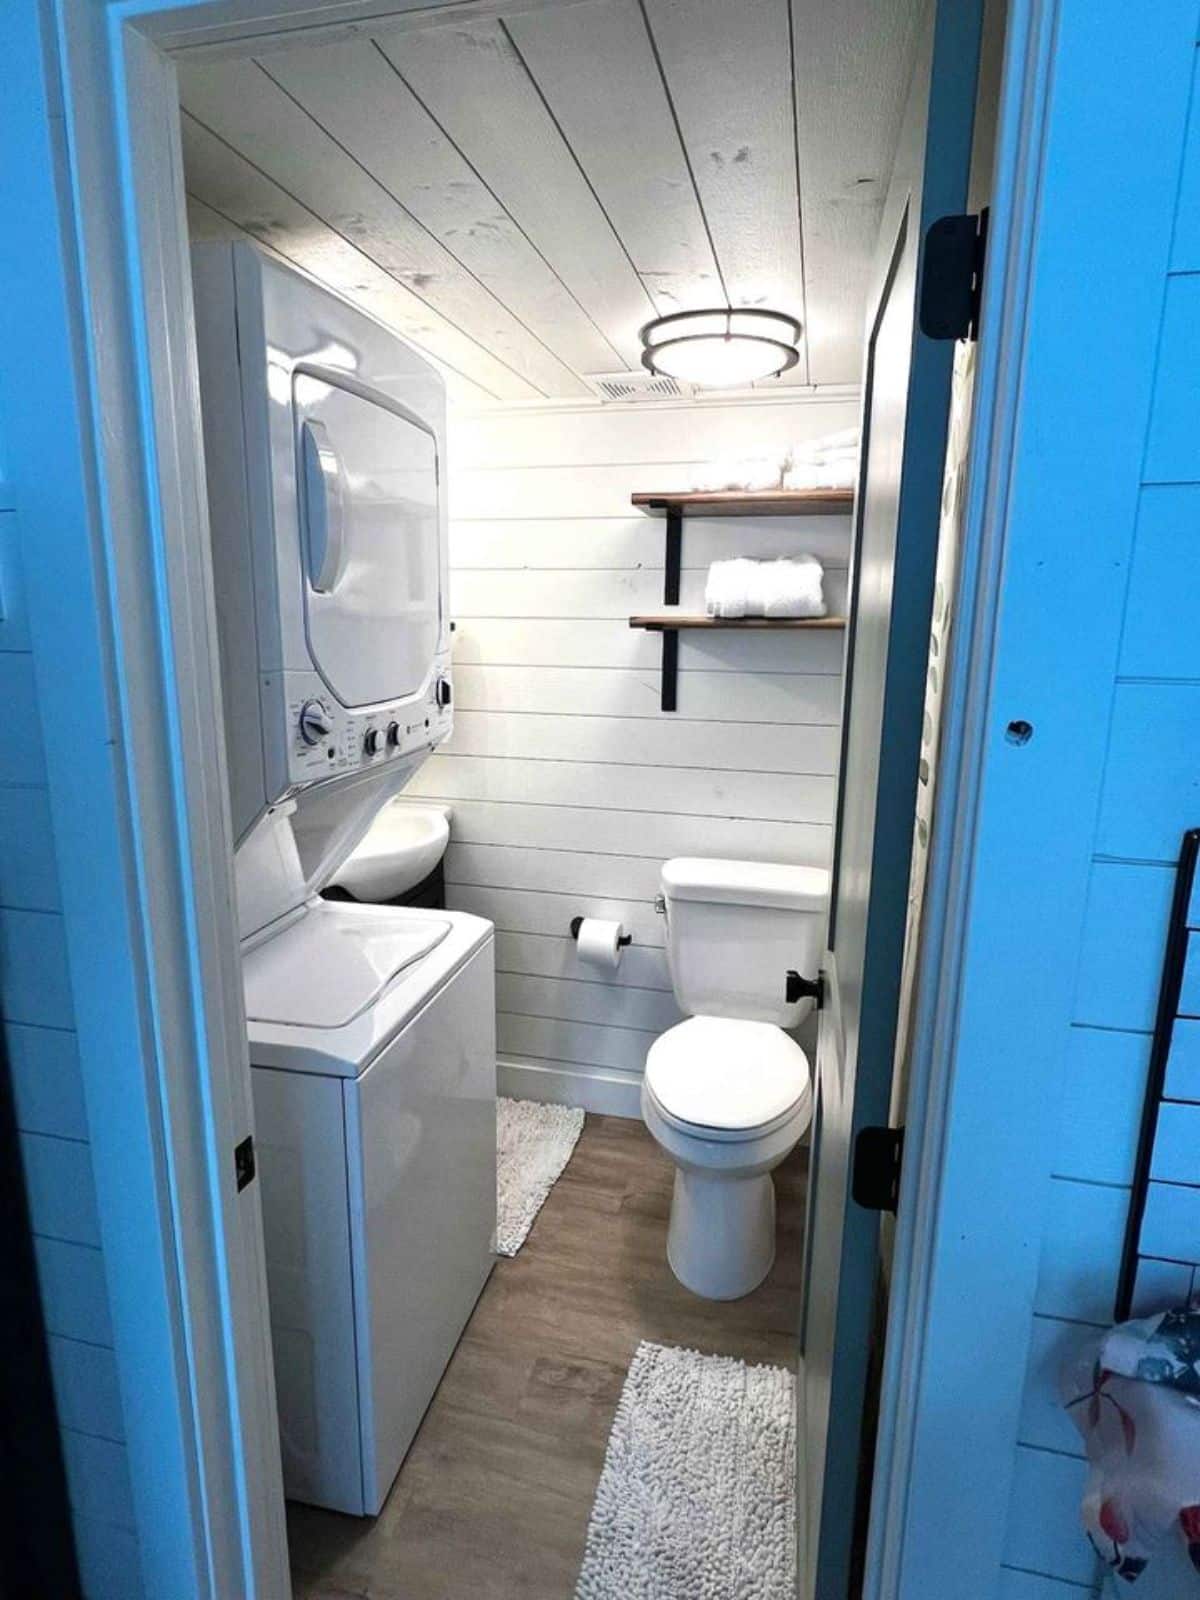 washer dryer combo and standard toilet with sink and vanity in bathroom of 28' luxury tiny home